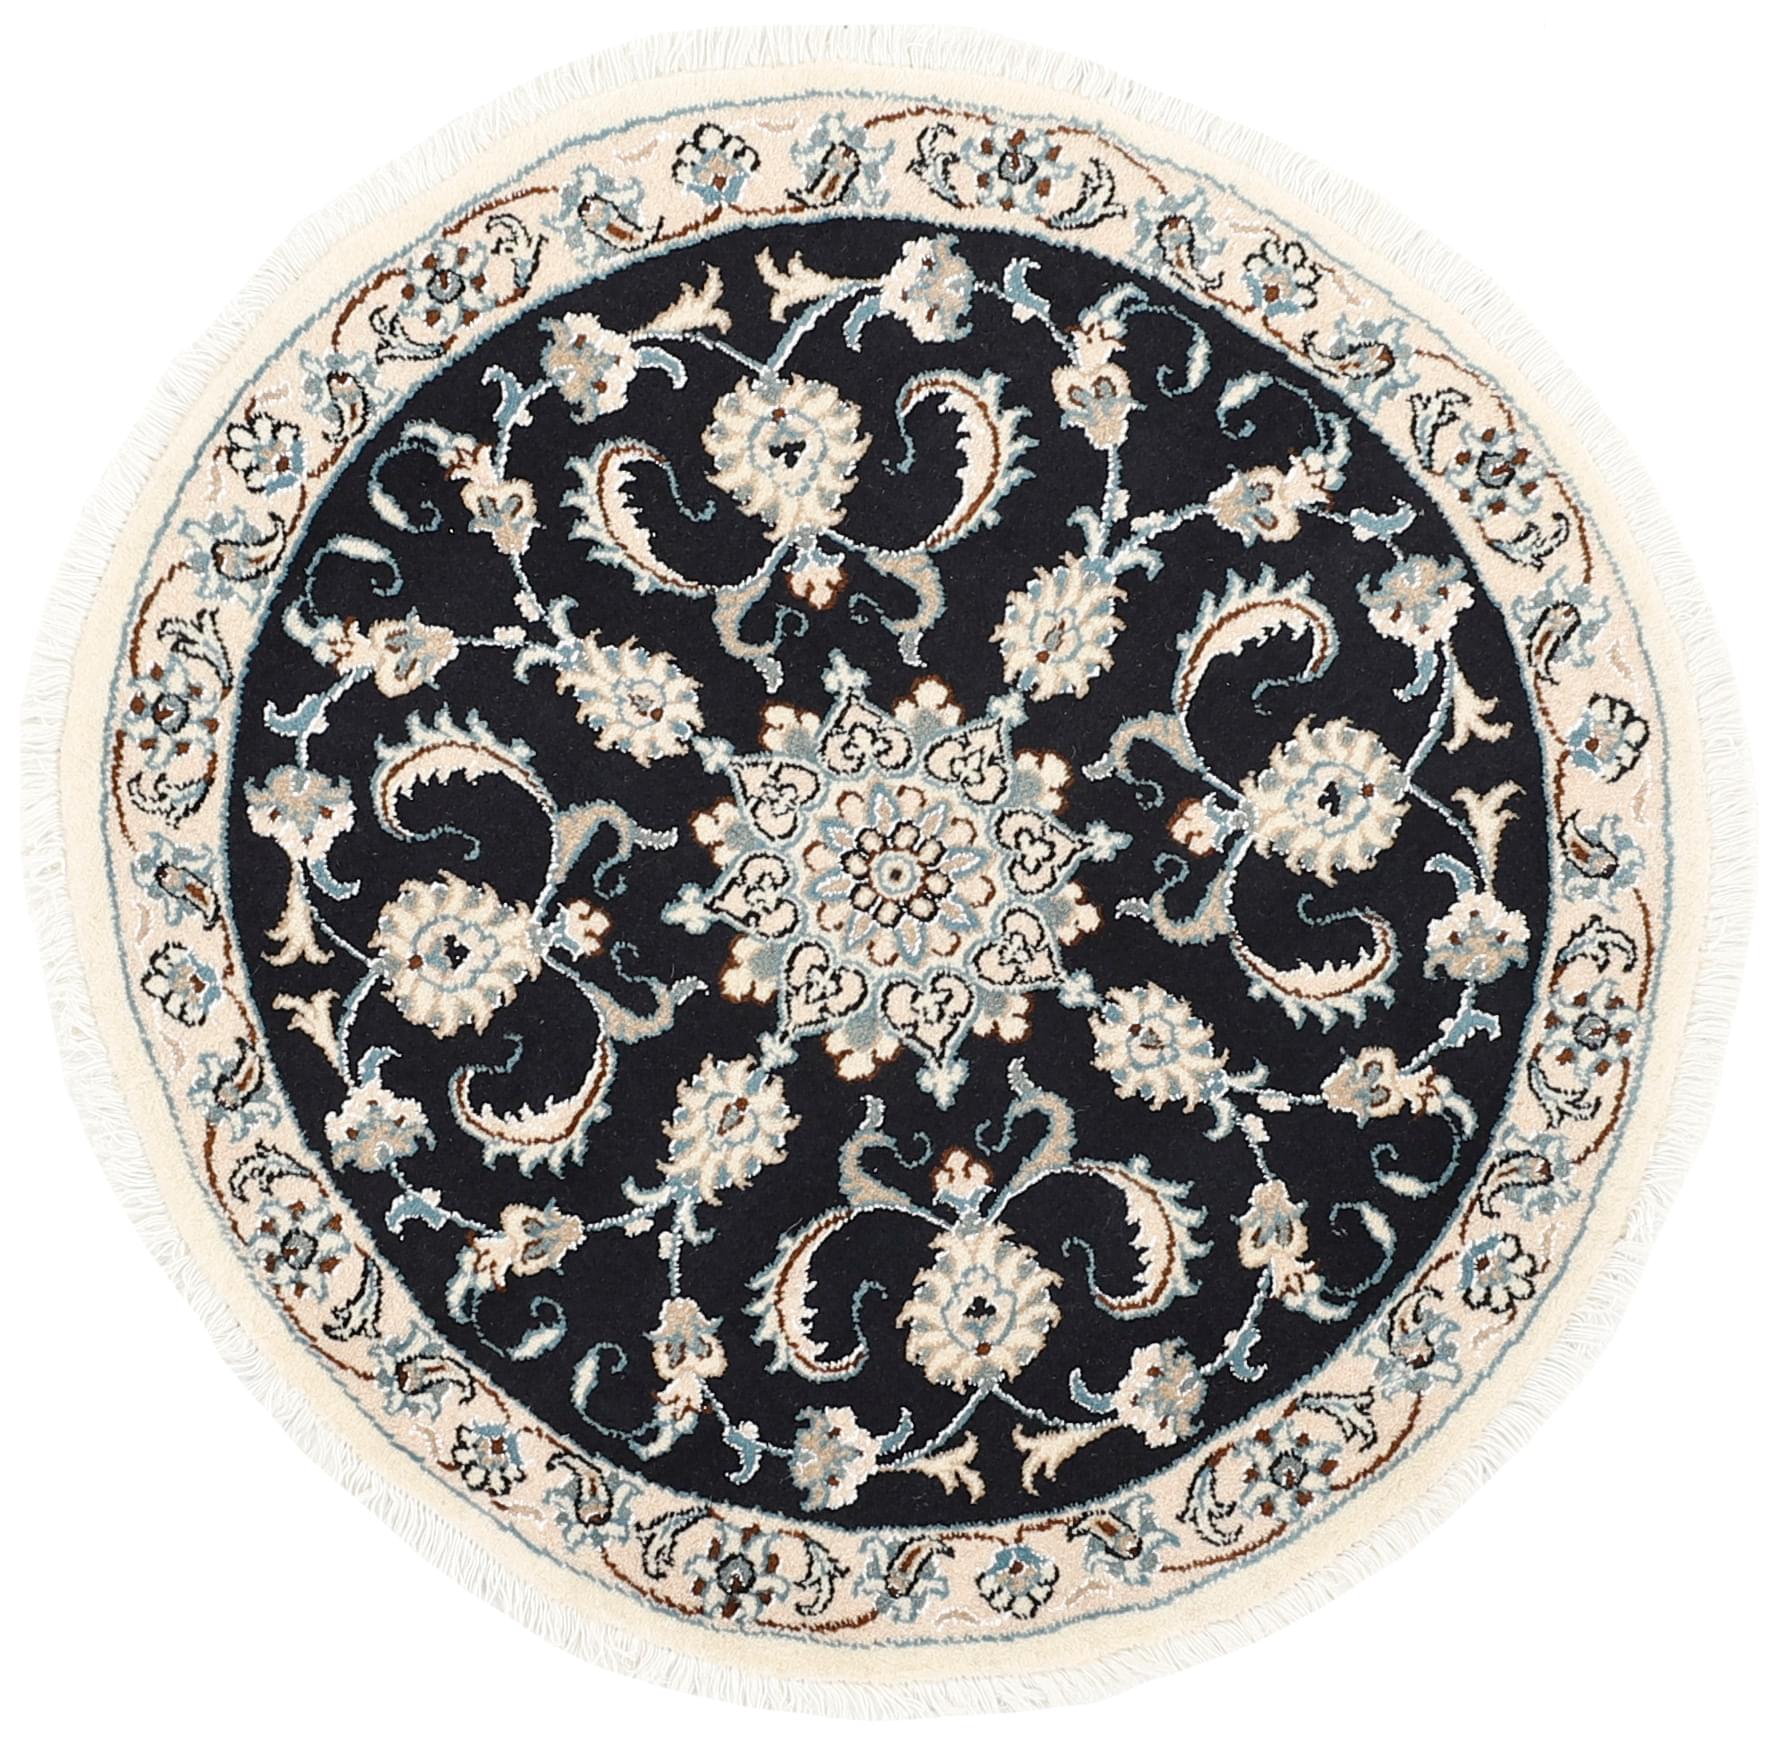 Authentic persian circle rug with a traditional floral design in black and beige